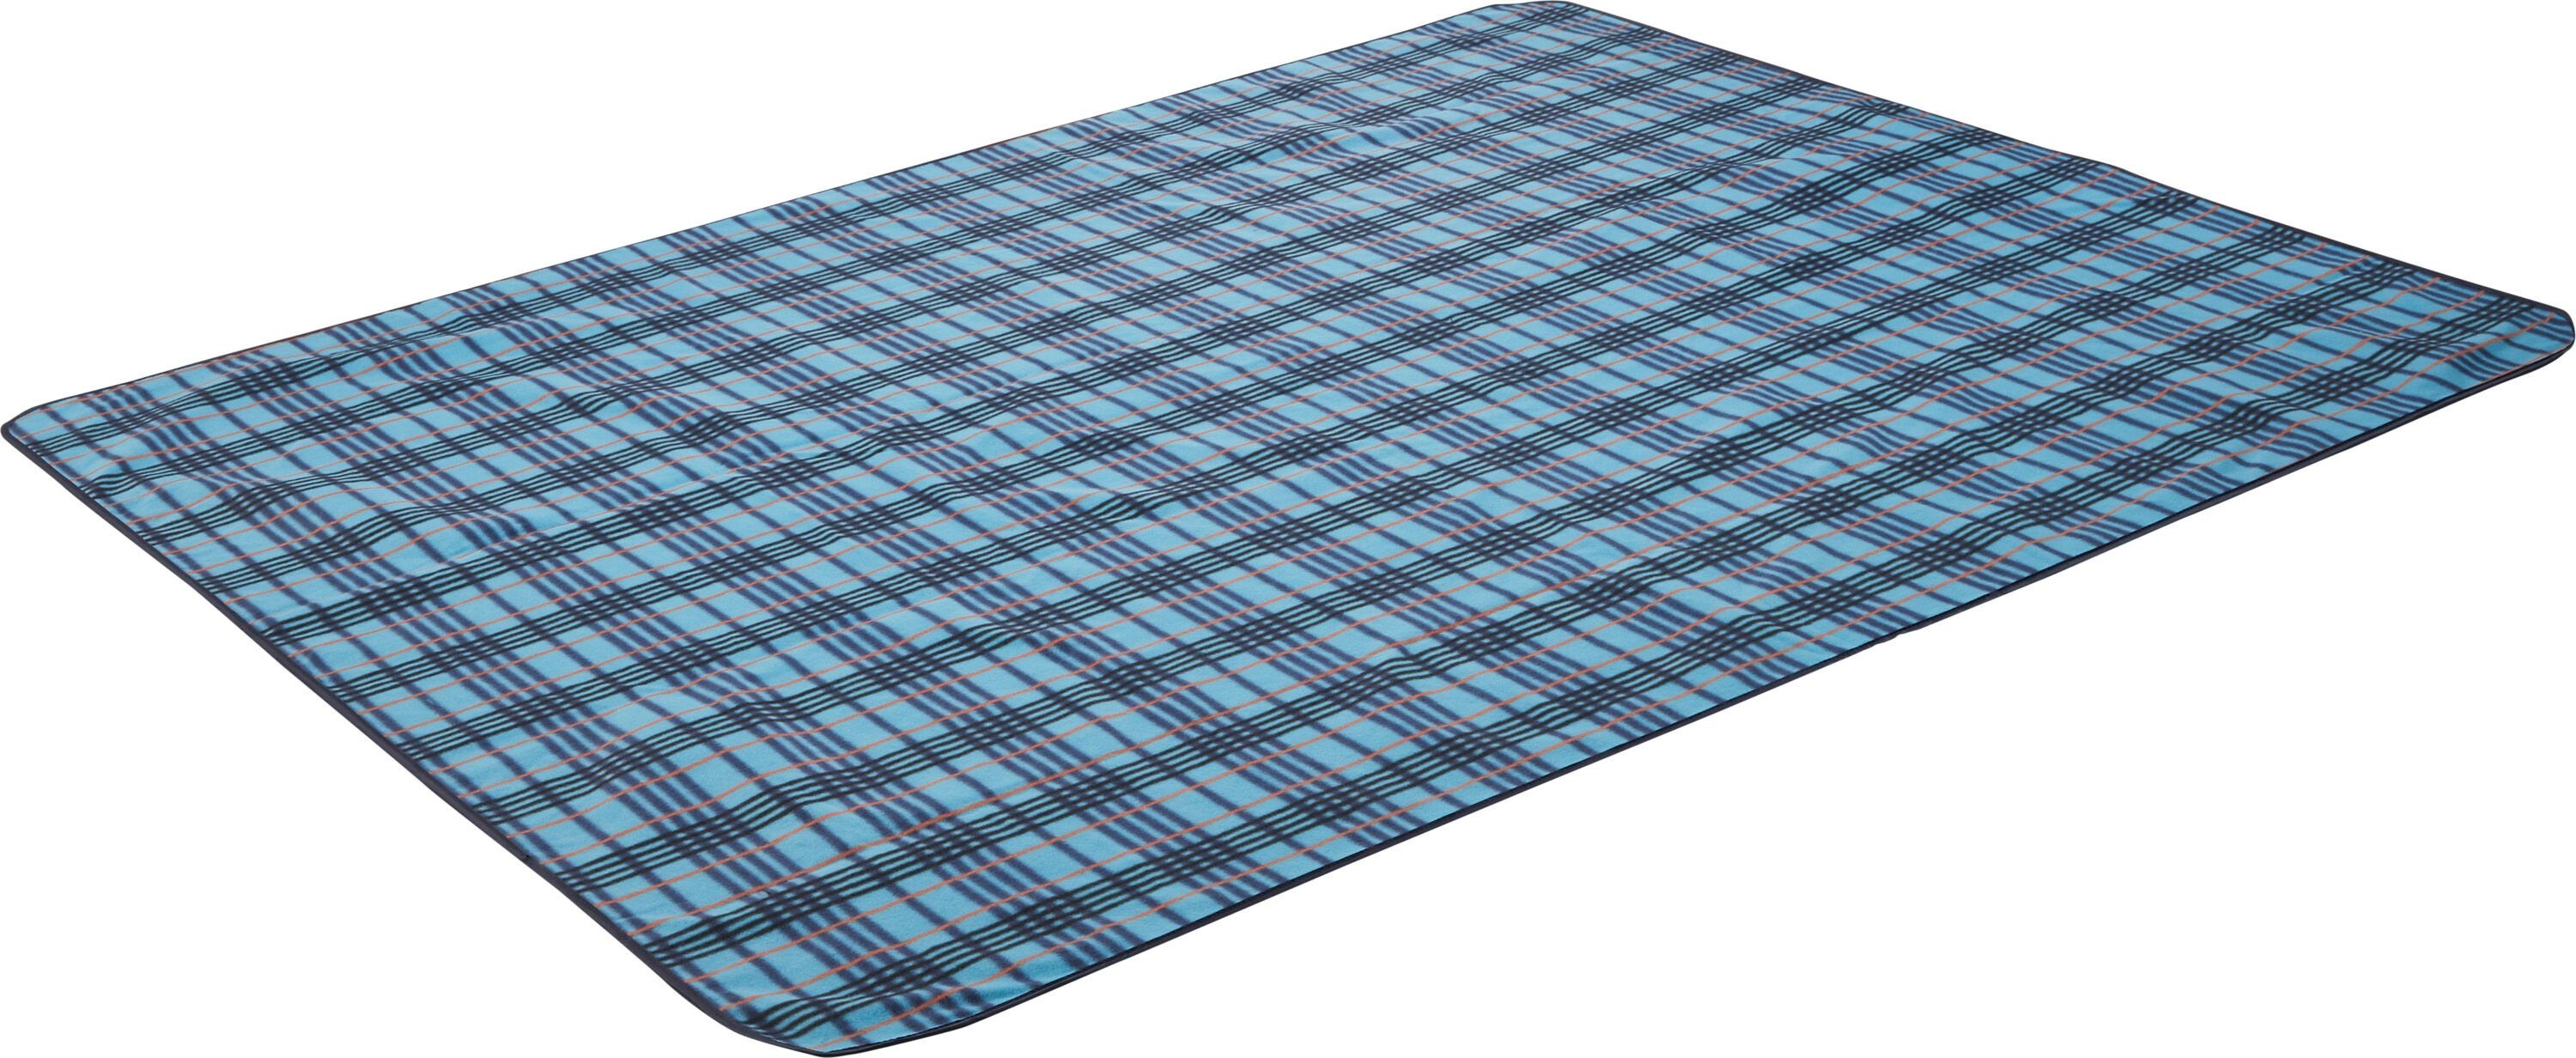 McKINLEY Picknickdecke Camping-Decke ANTHRACITE/TURQUOISE, STRIPED RUG PICNIC